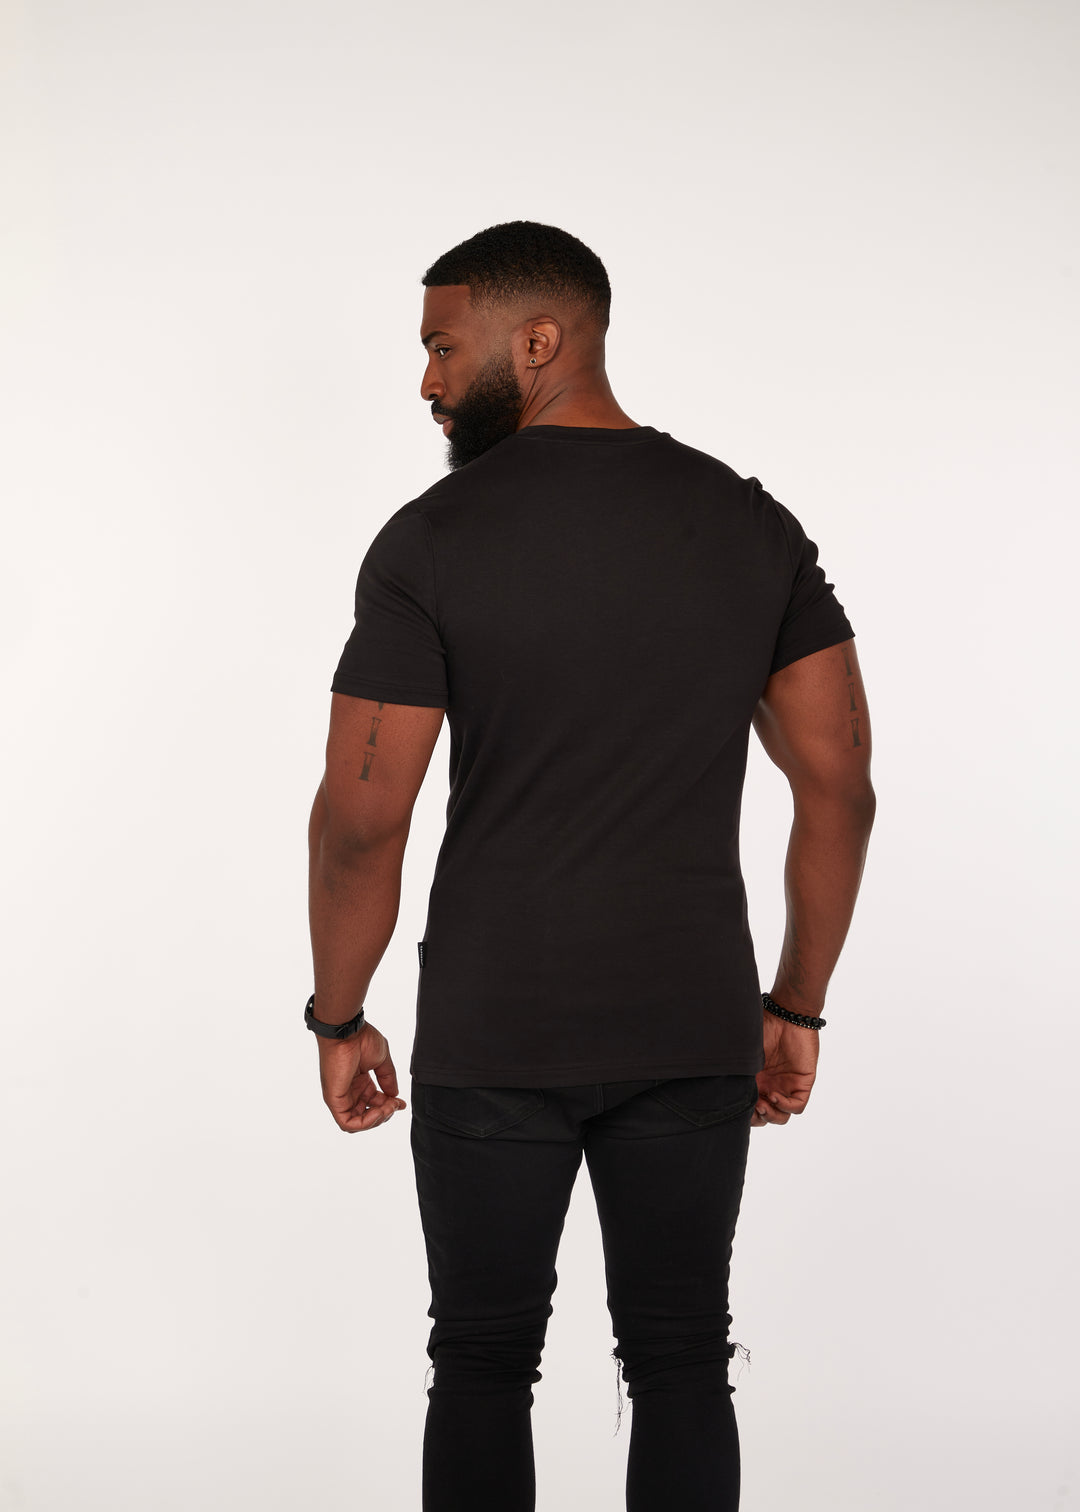 Mens Black Muscle Fit V-Neck T-Shirt. A Proportionally Fitted and Tapered Fit V Neck. The best v neck t-shirt for muscular guys.